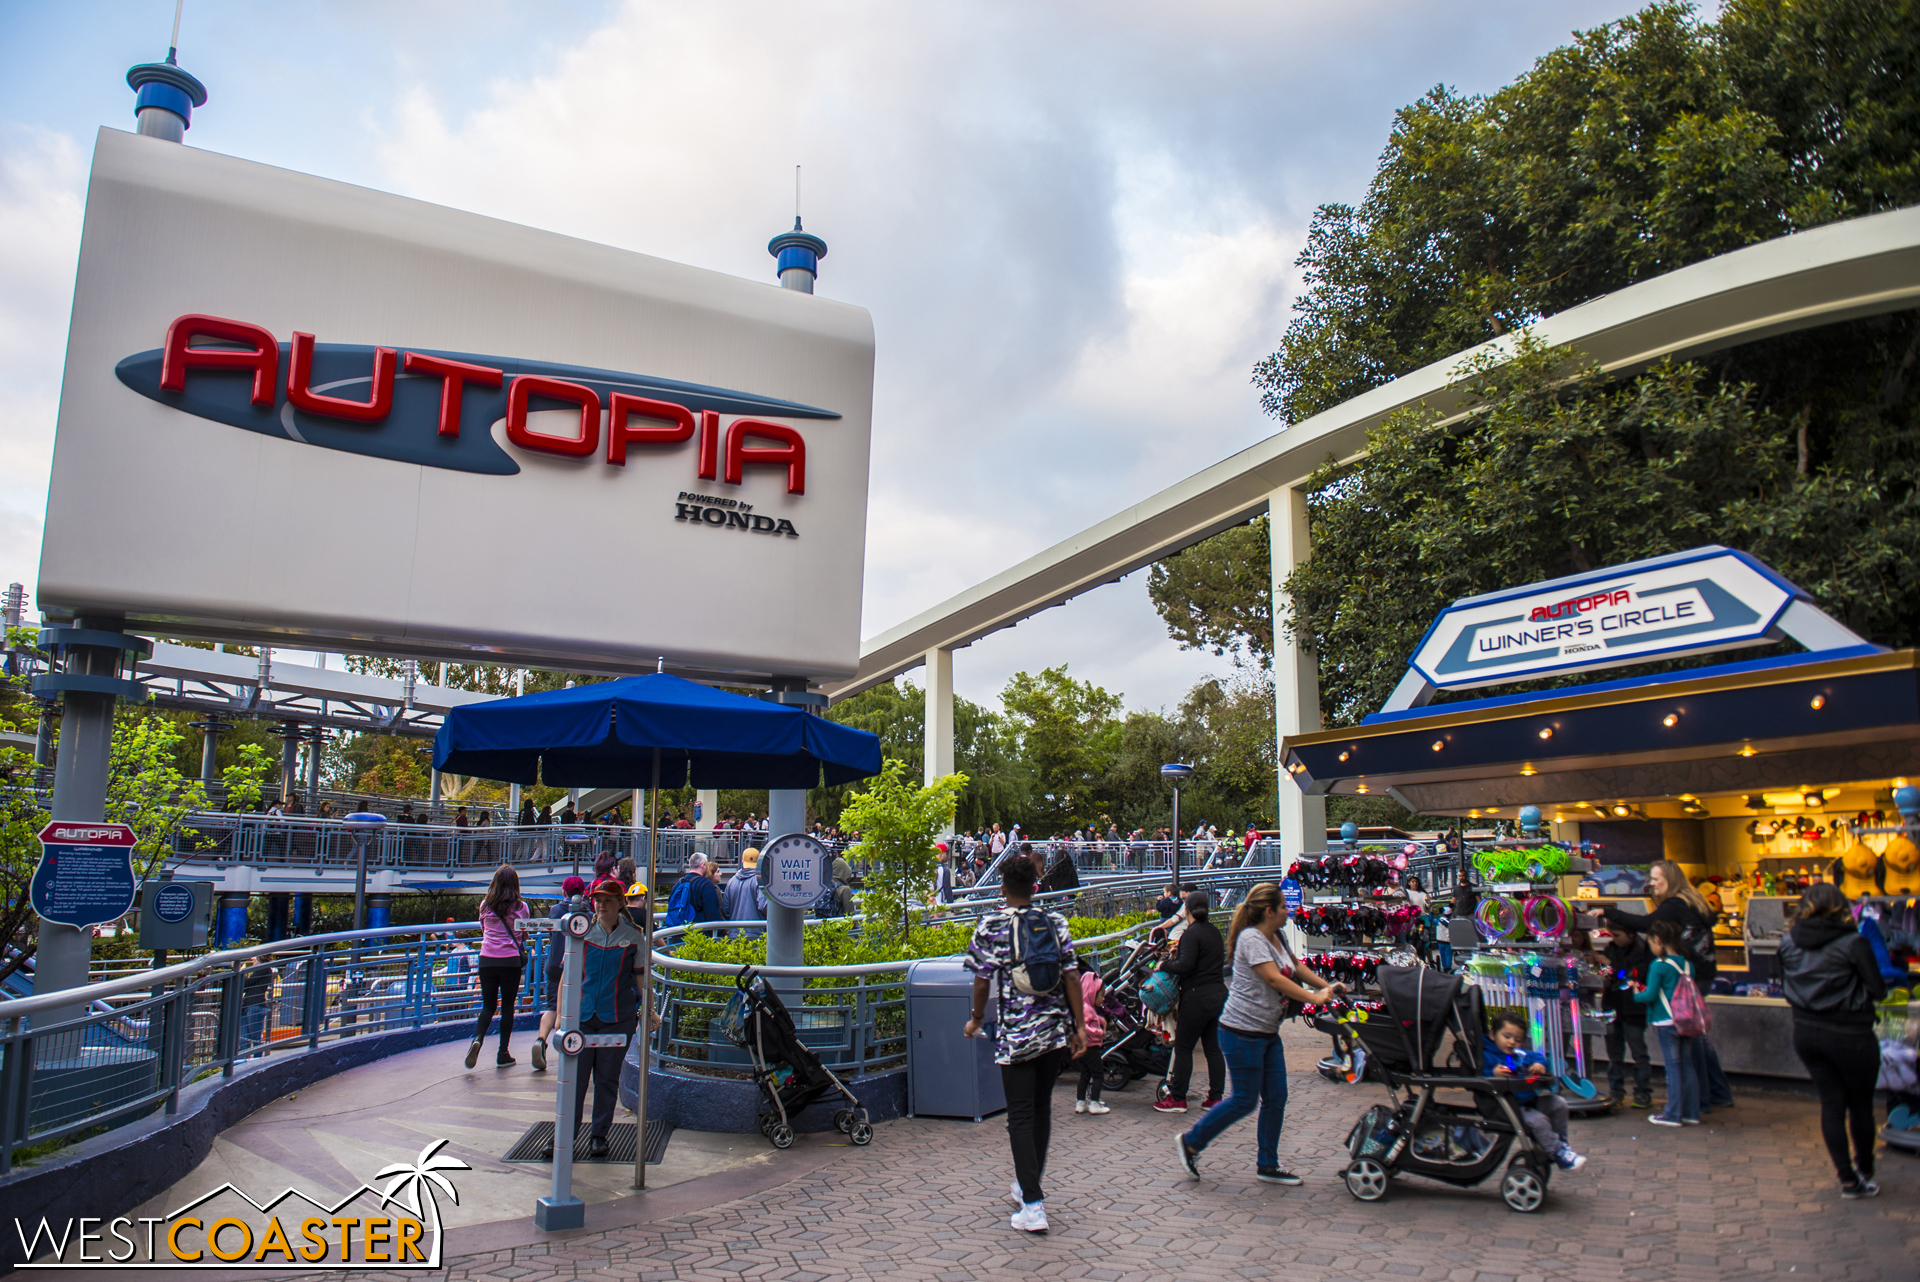  Over in Tomorrowland, the Autopia has been given a little freshening up. 